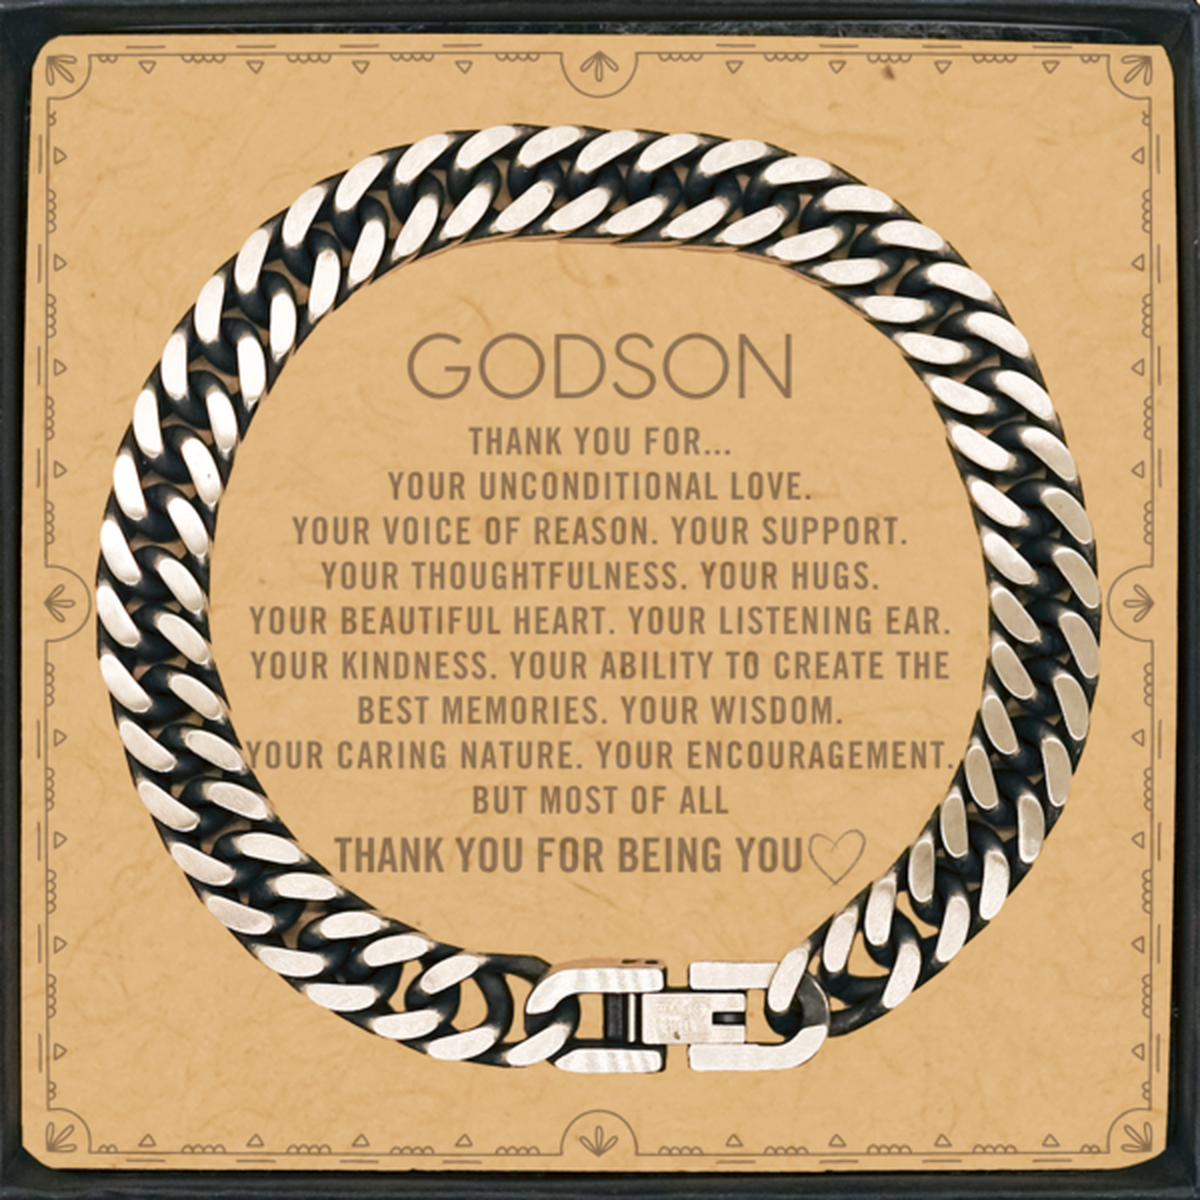 Godson Cuban Link Chain Bracelet Custom, Message Card Gifts For Godson Christmas Graduation Birthday Gifts for Men Women Godson Thank you for Your unconditional love